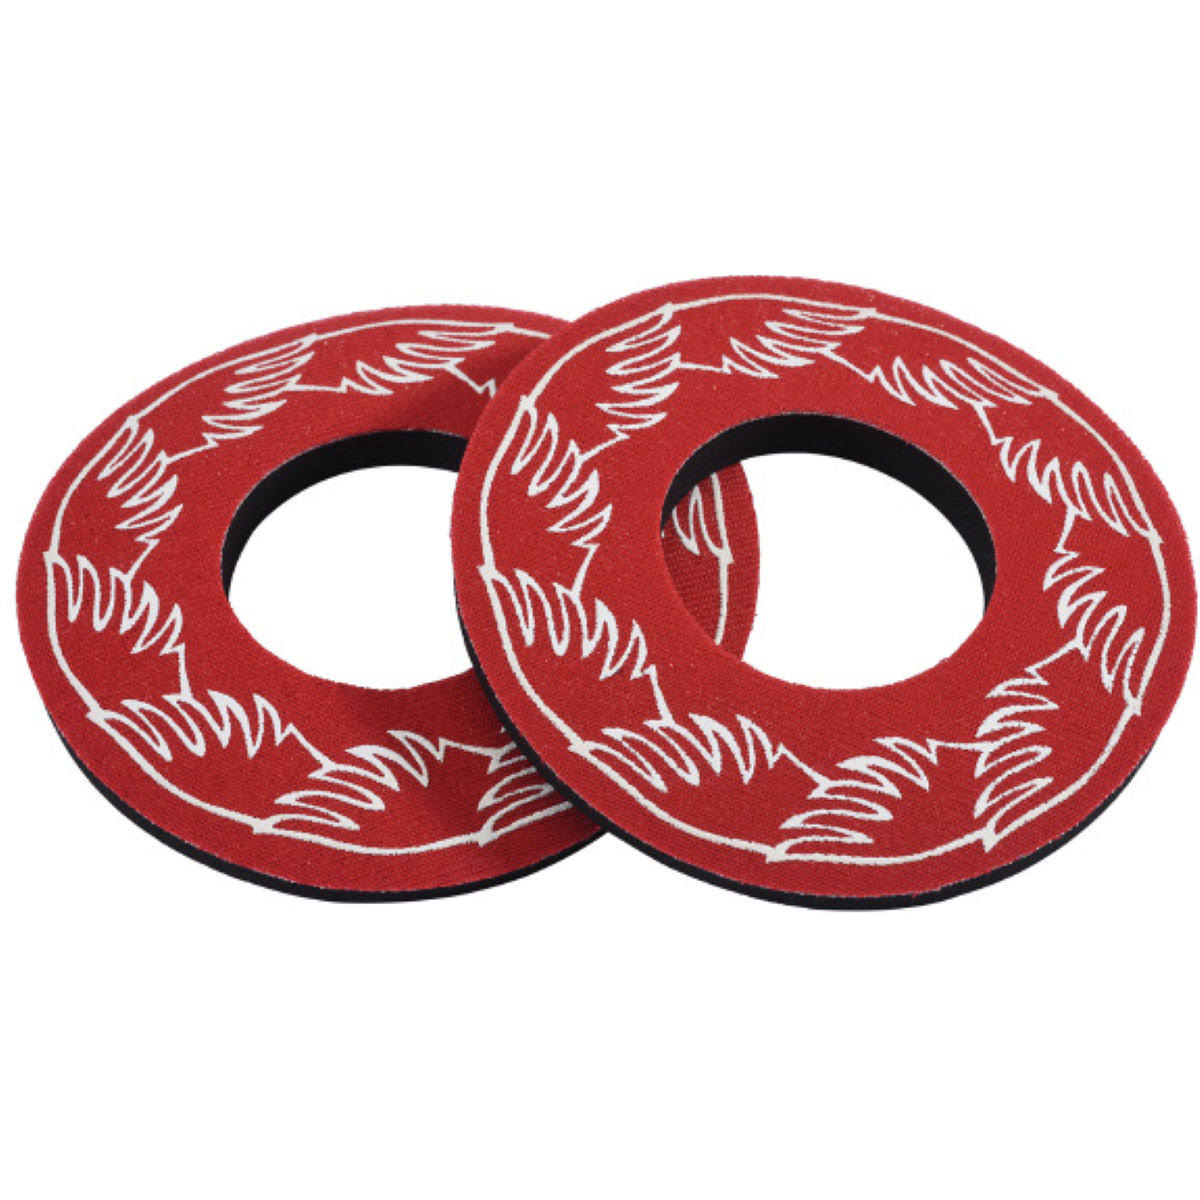 Se Racing Wing BMX Grip Donuts - Red, Pair